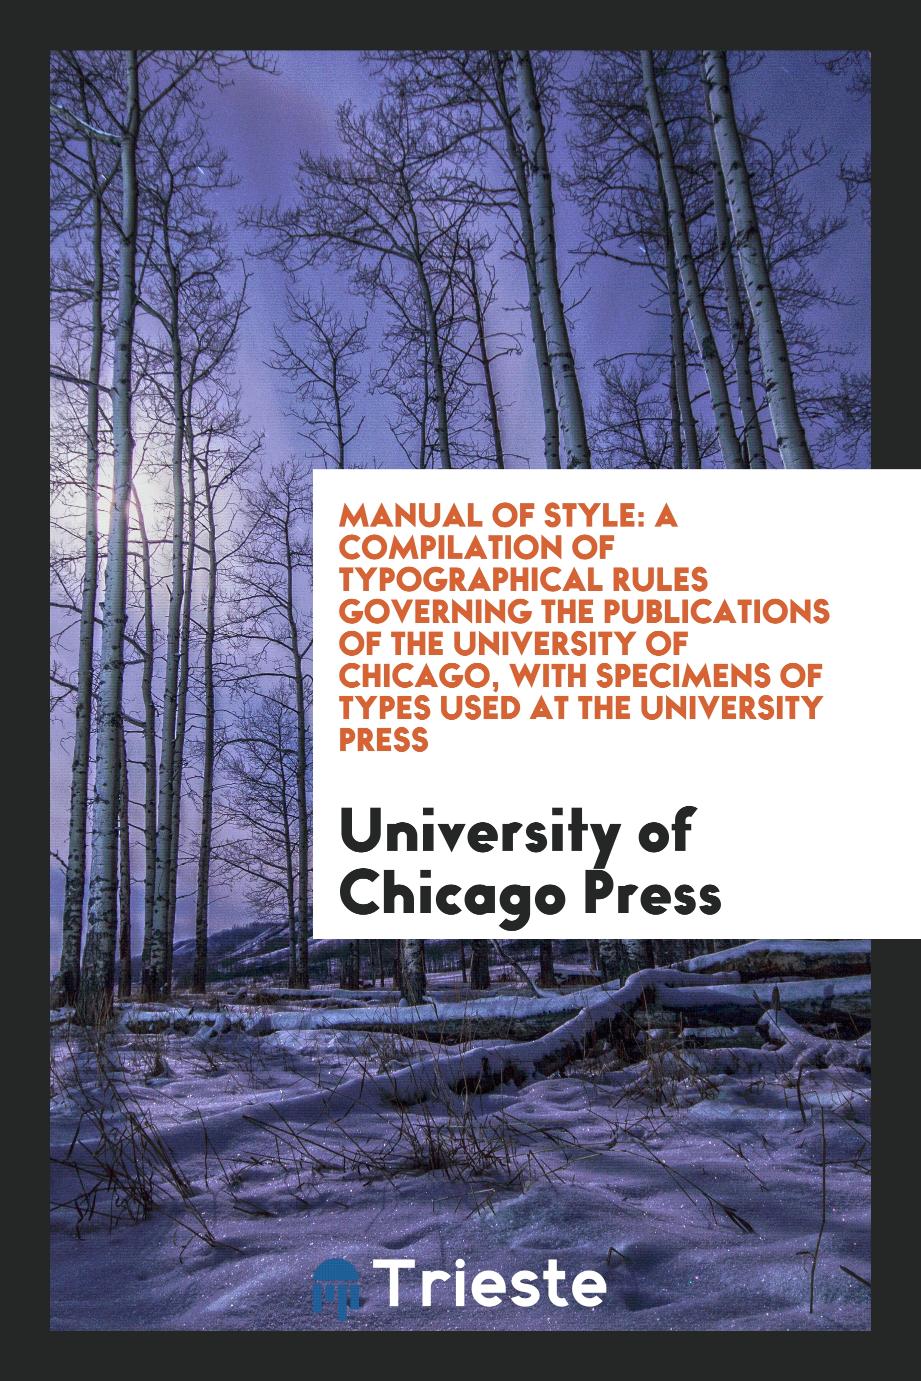 Manual of Style: A Compilation of Typographical Rules Governing the Publications of the University of Chicago, with Specimens of Types Used at the University Press